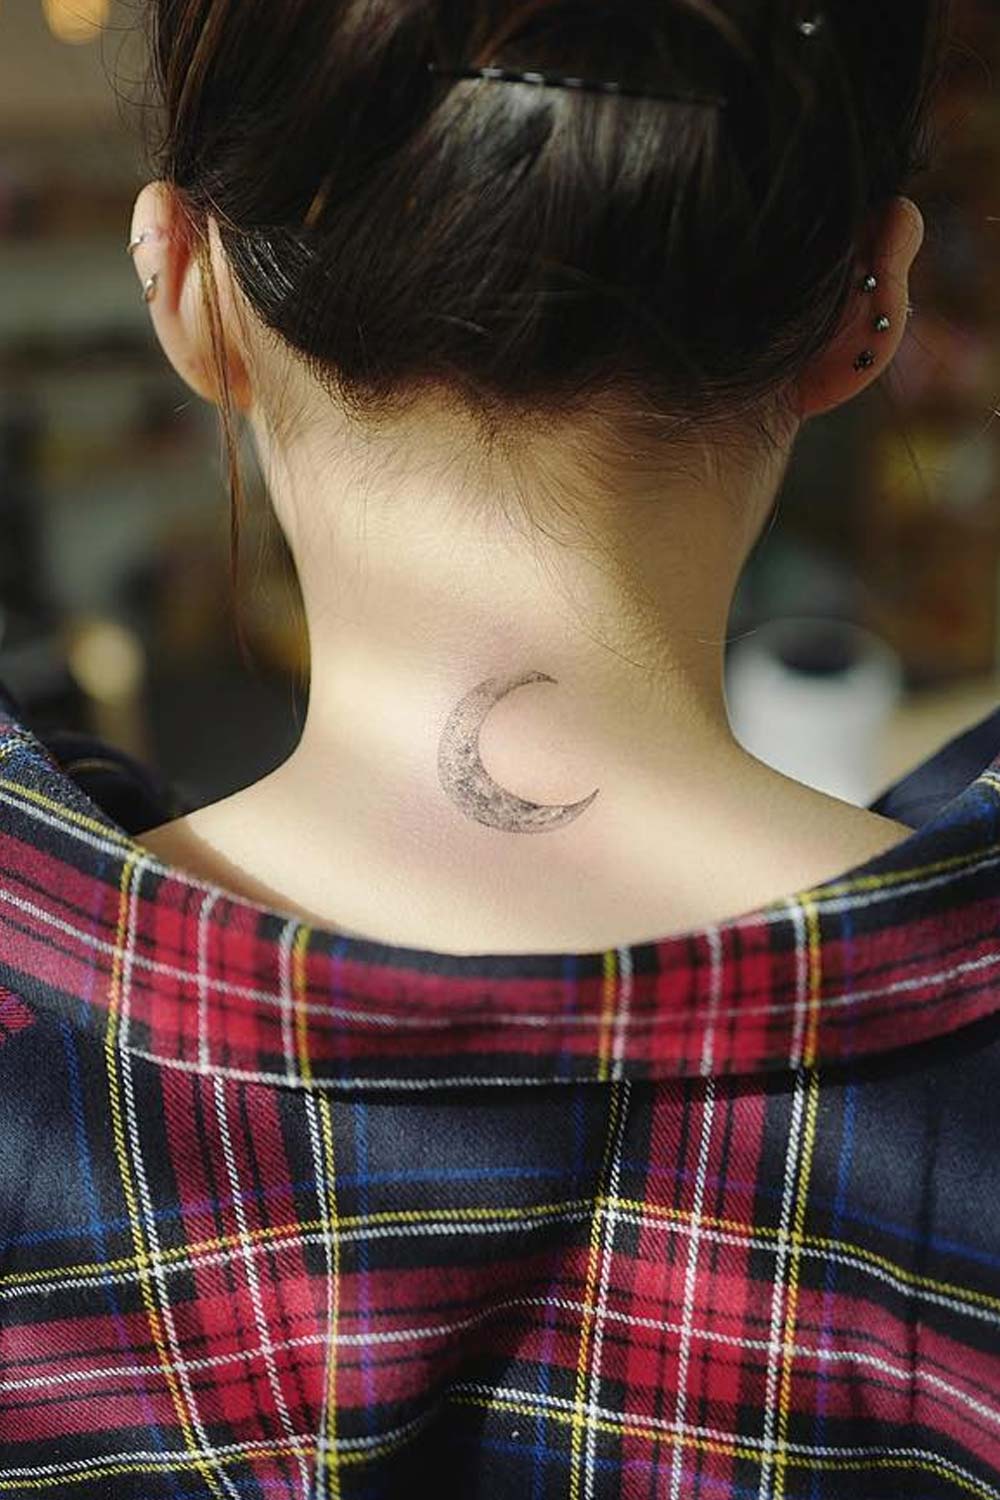 Neck Tattoos For Women: Your Personal Guide 